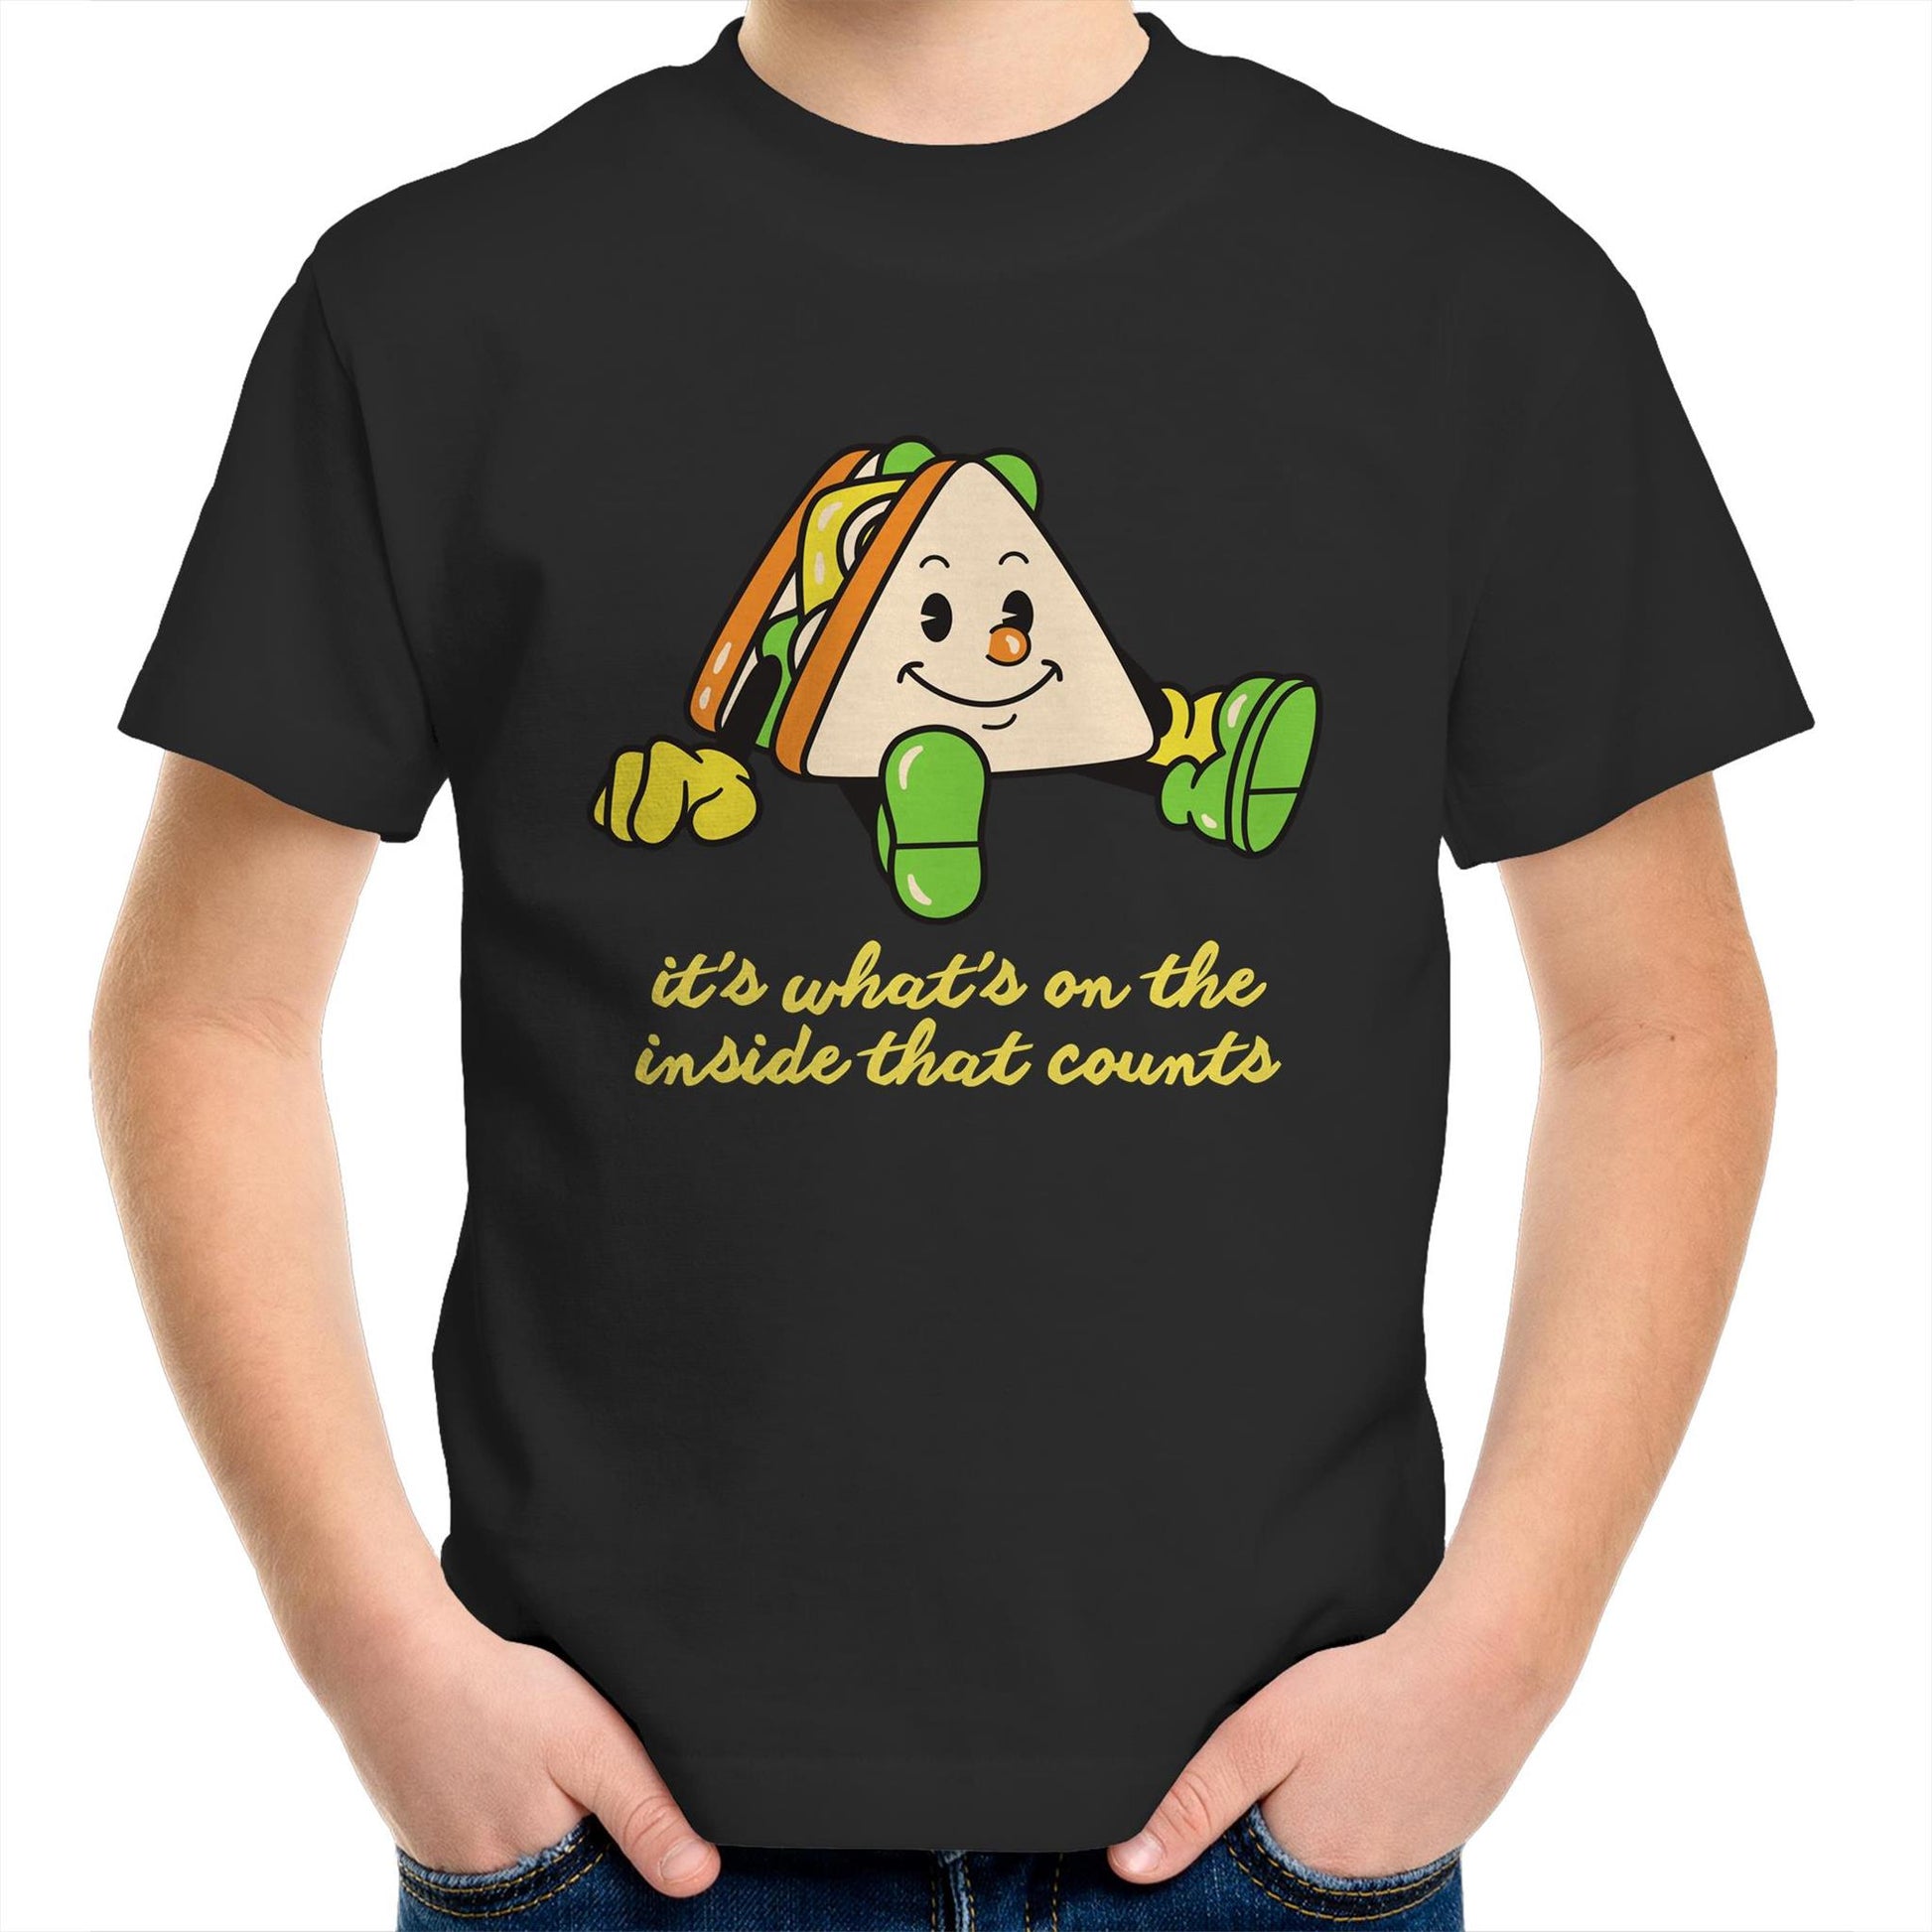 Sandwich, It's What's On The Inside That Counts - Kids Youth T-Shirt Black Kids Youth T-shirt Food Motivation